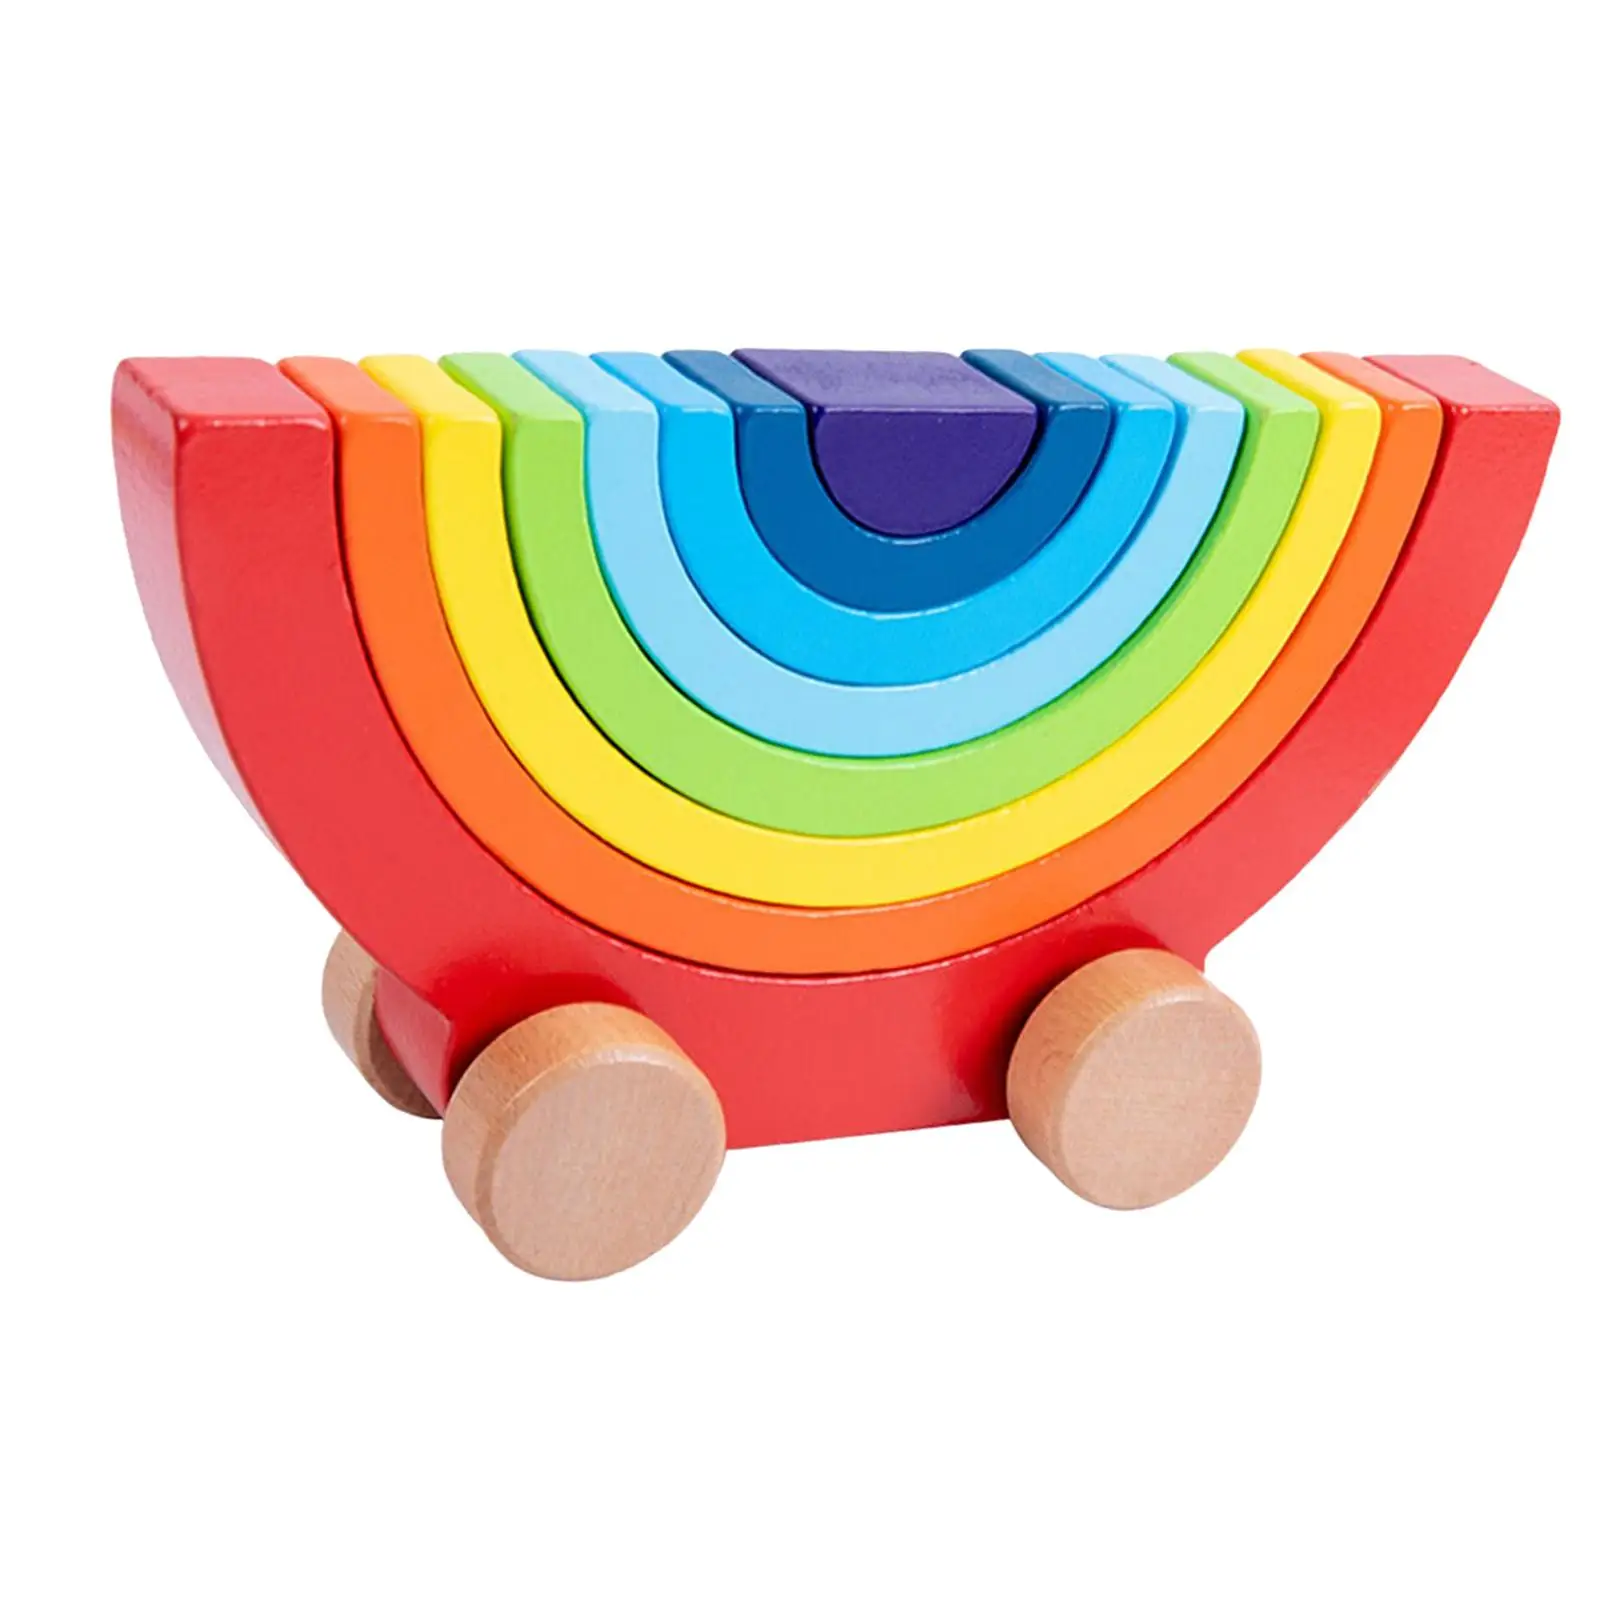 Wooden Building Blocks Car Toy Stackable Colorful Creative Arch for Kids Teaching